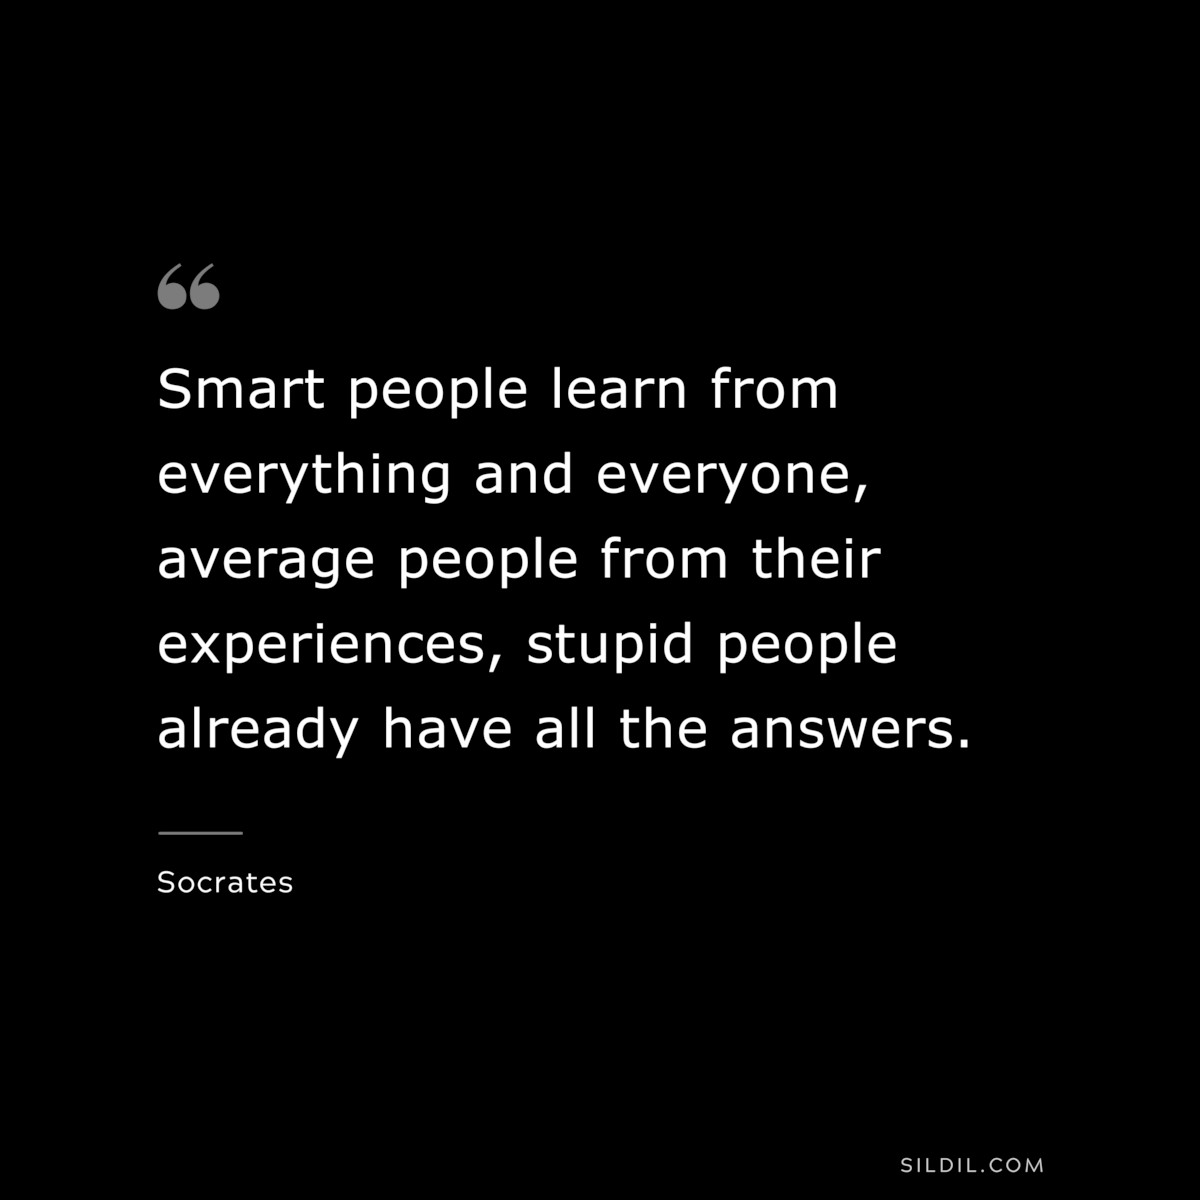 Smart people learn from everything and everyone, average people from their experiences, stupid people already have all the answers. ― Socrates